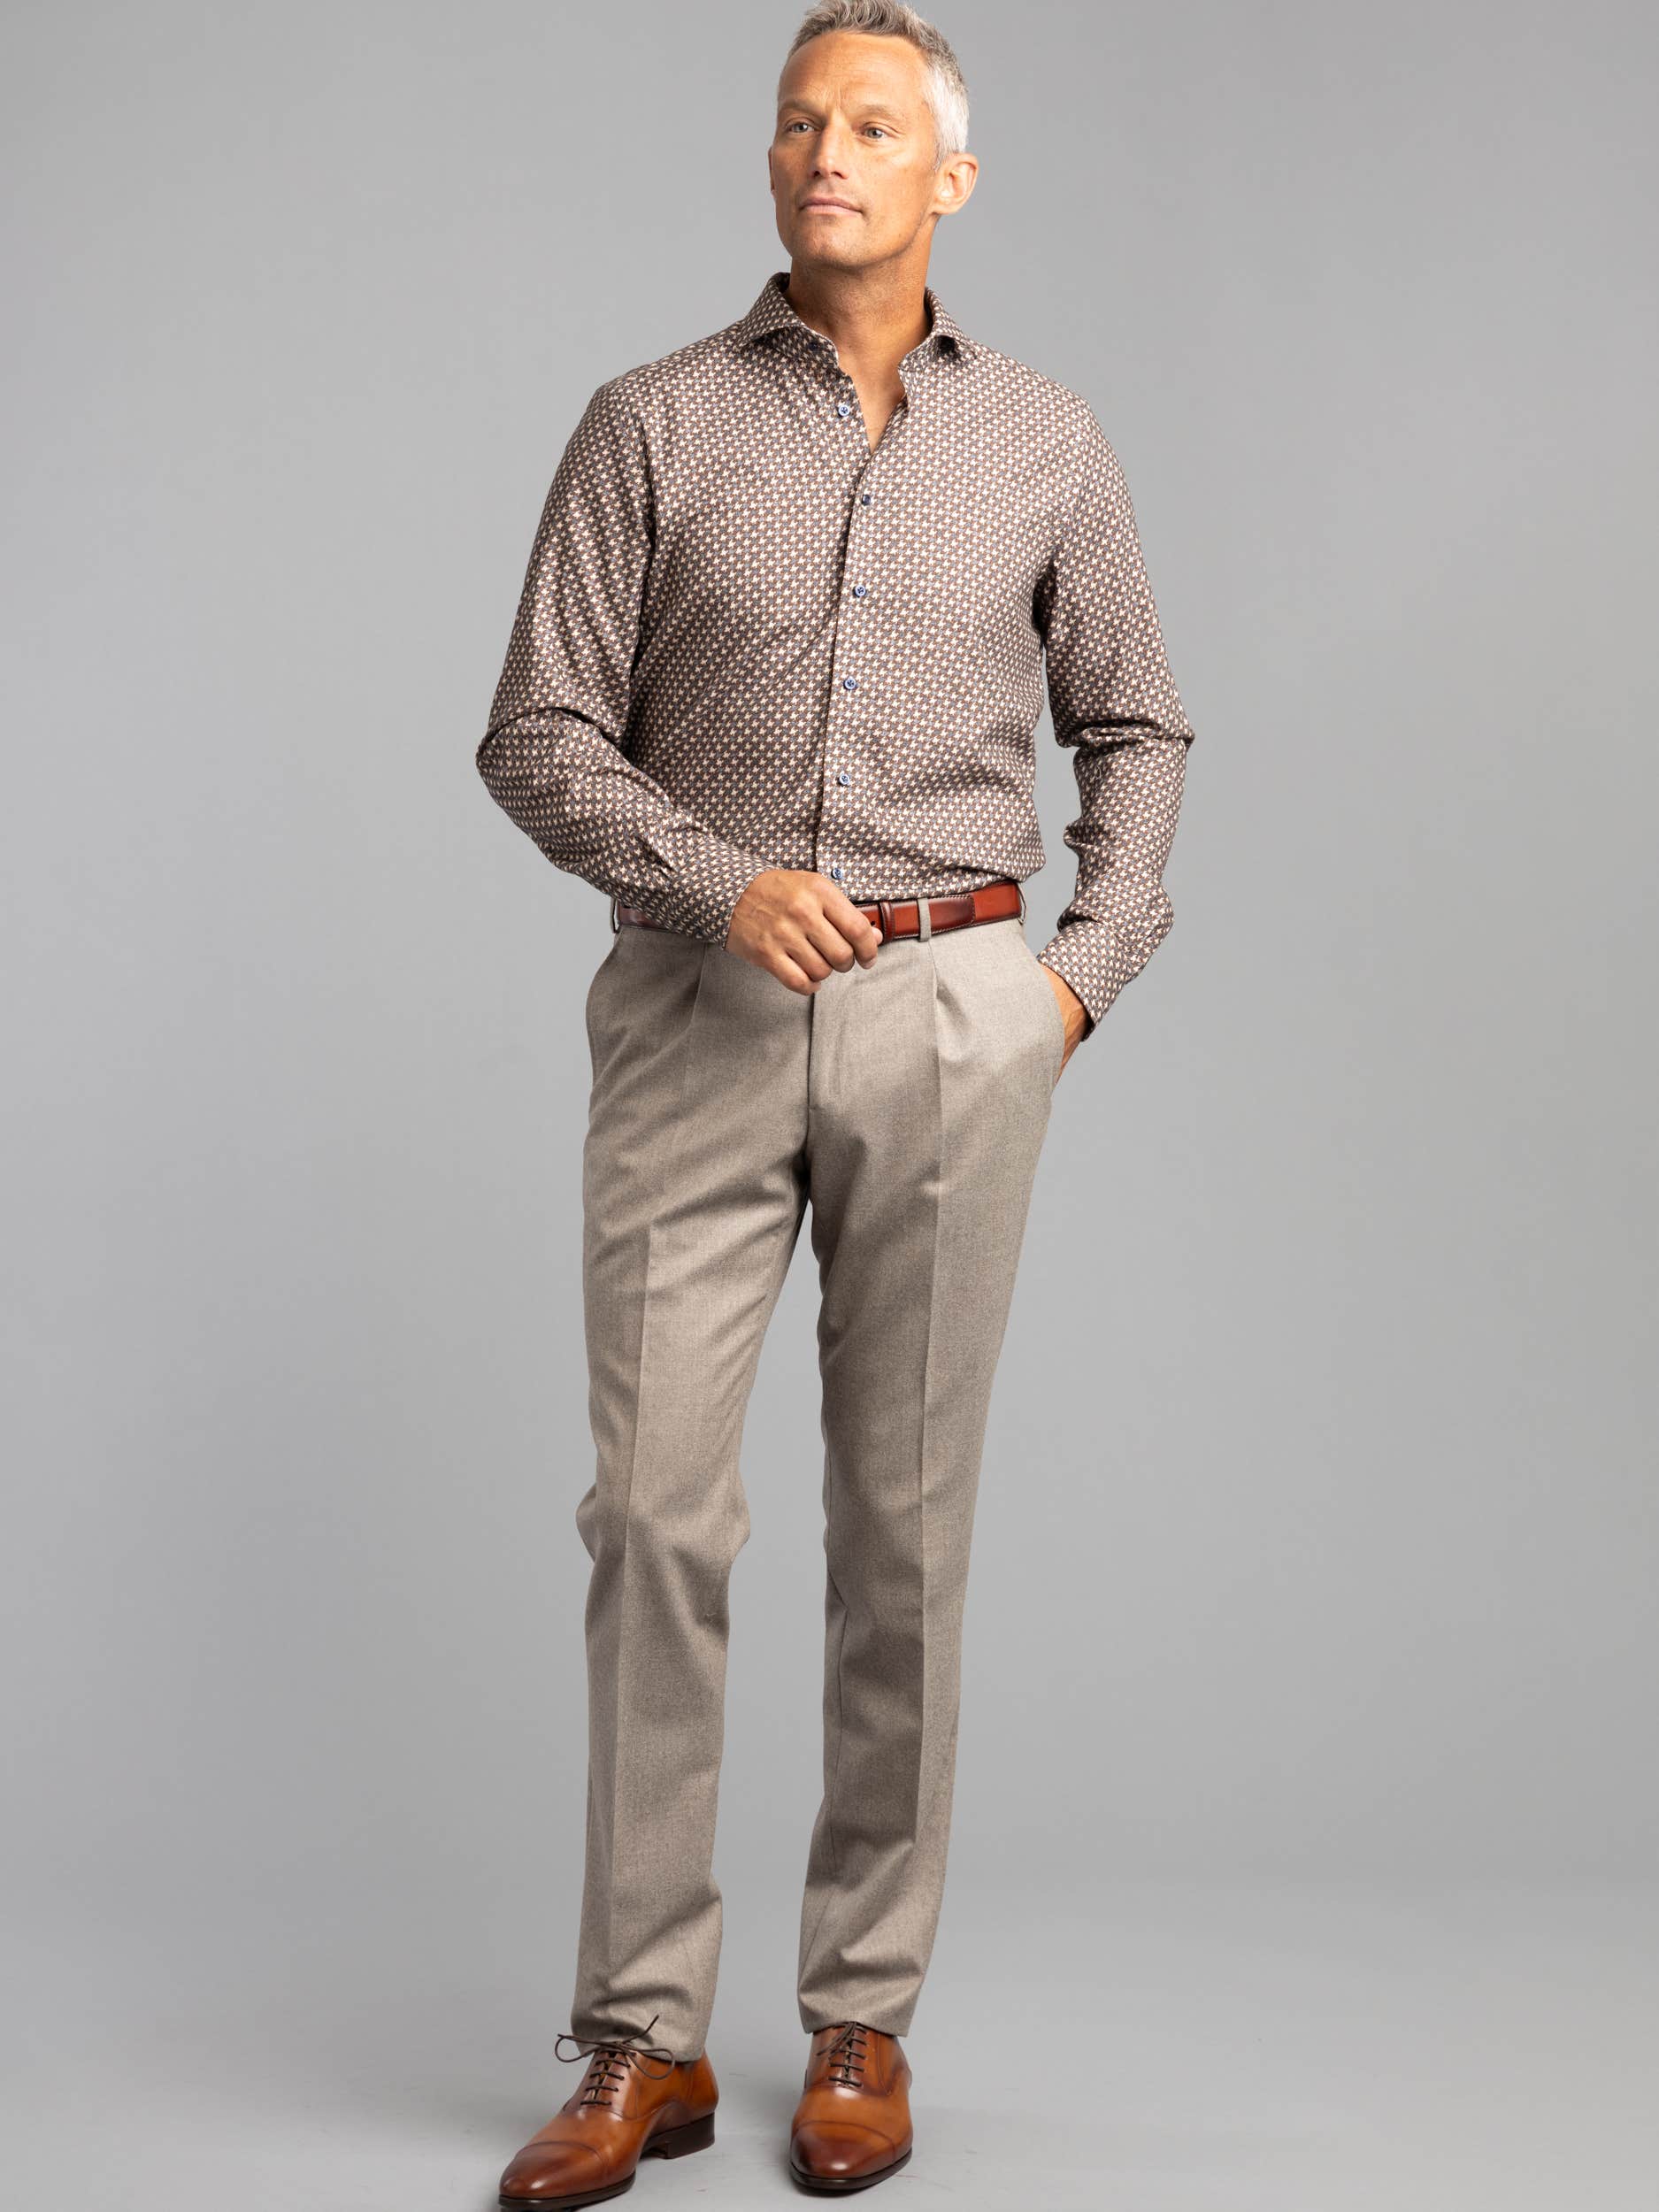 Brown Geometric Patterned Dress Shirt – The Helm Clothing